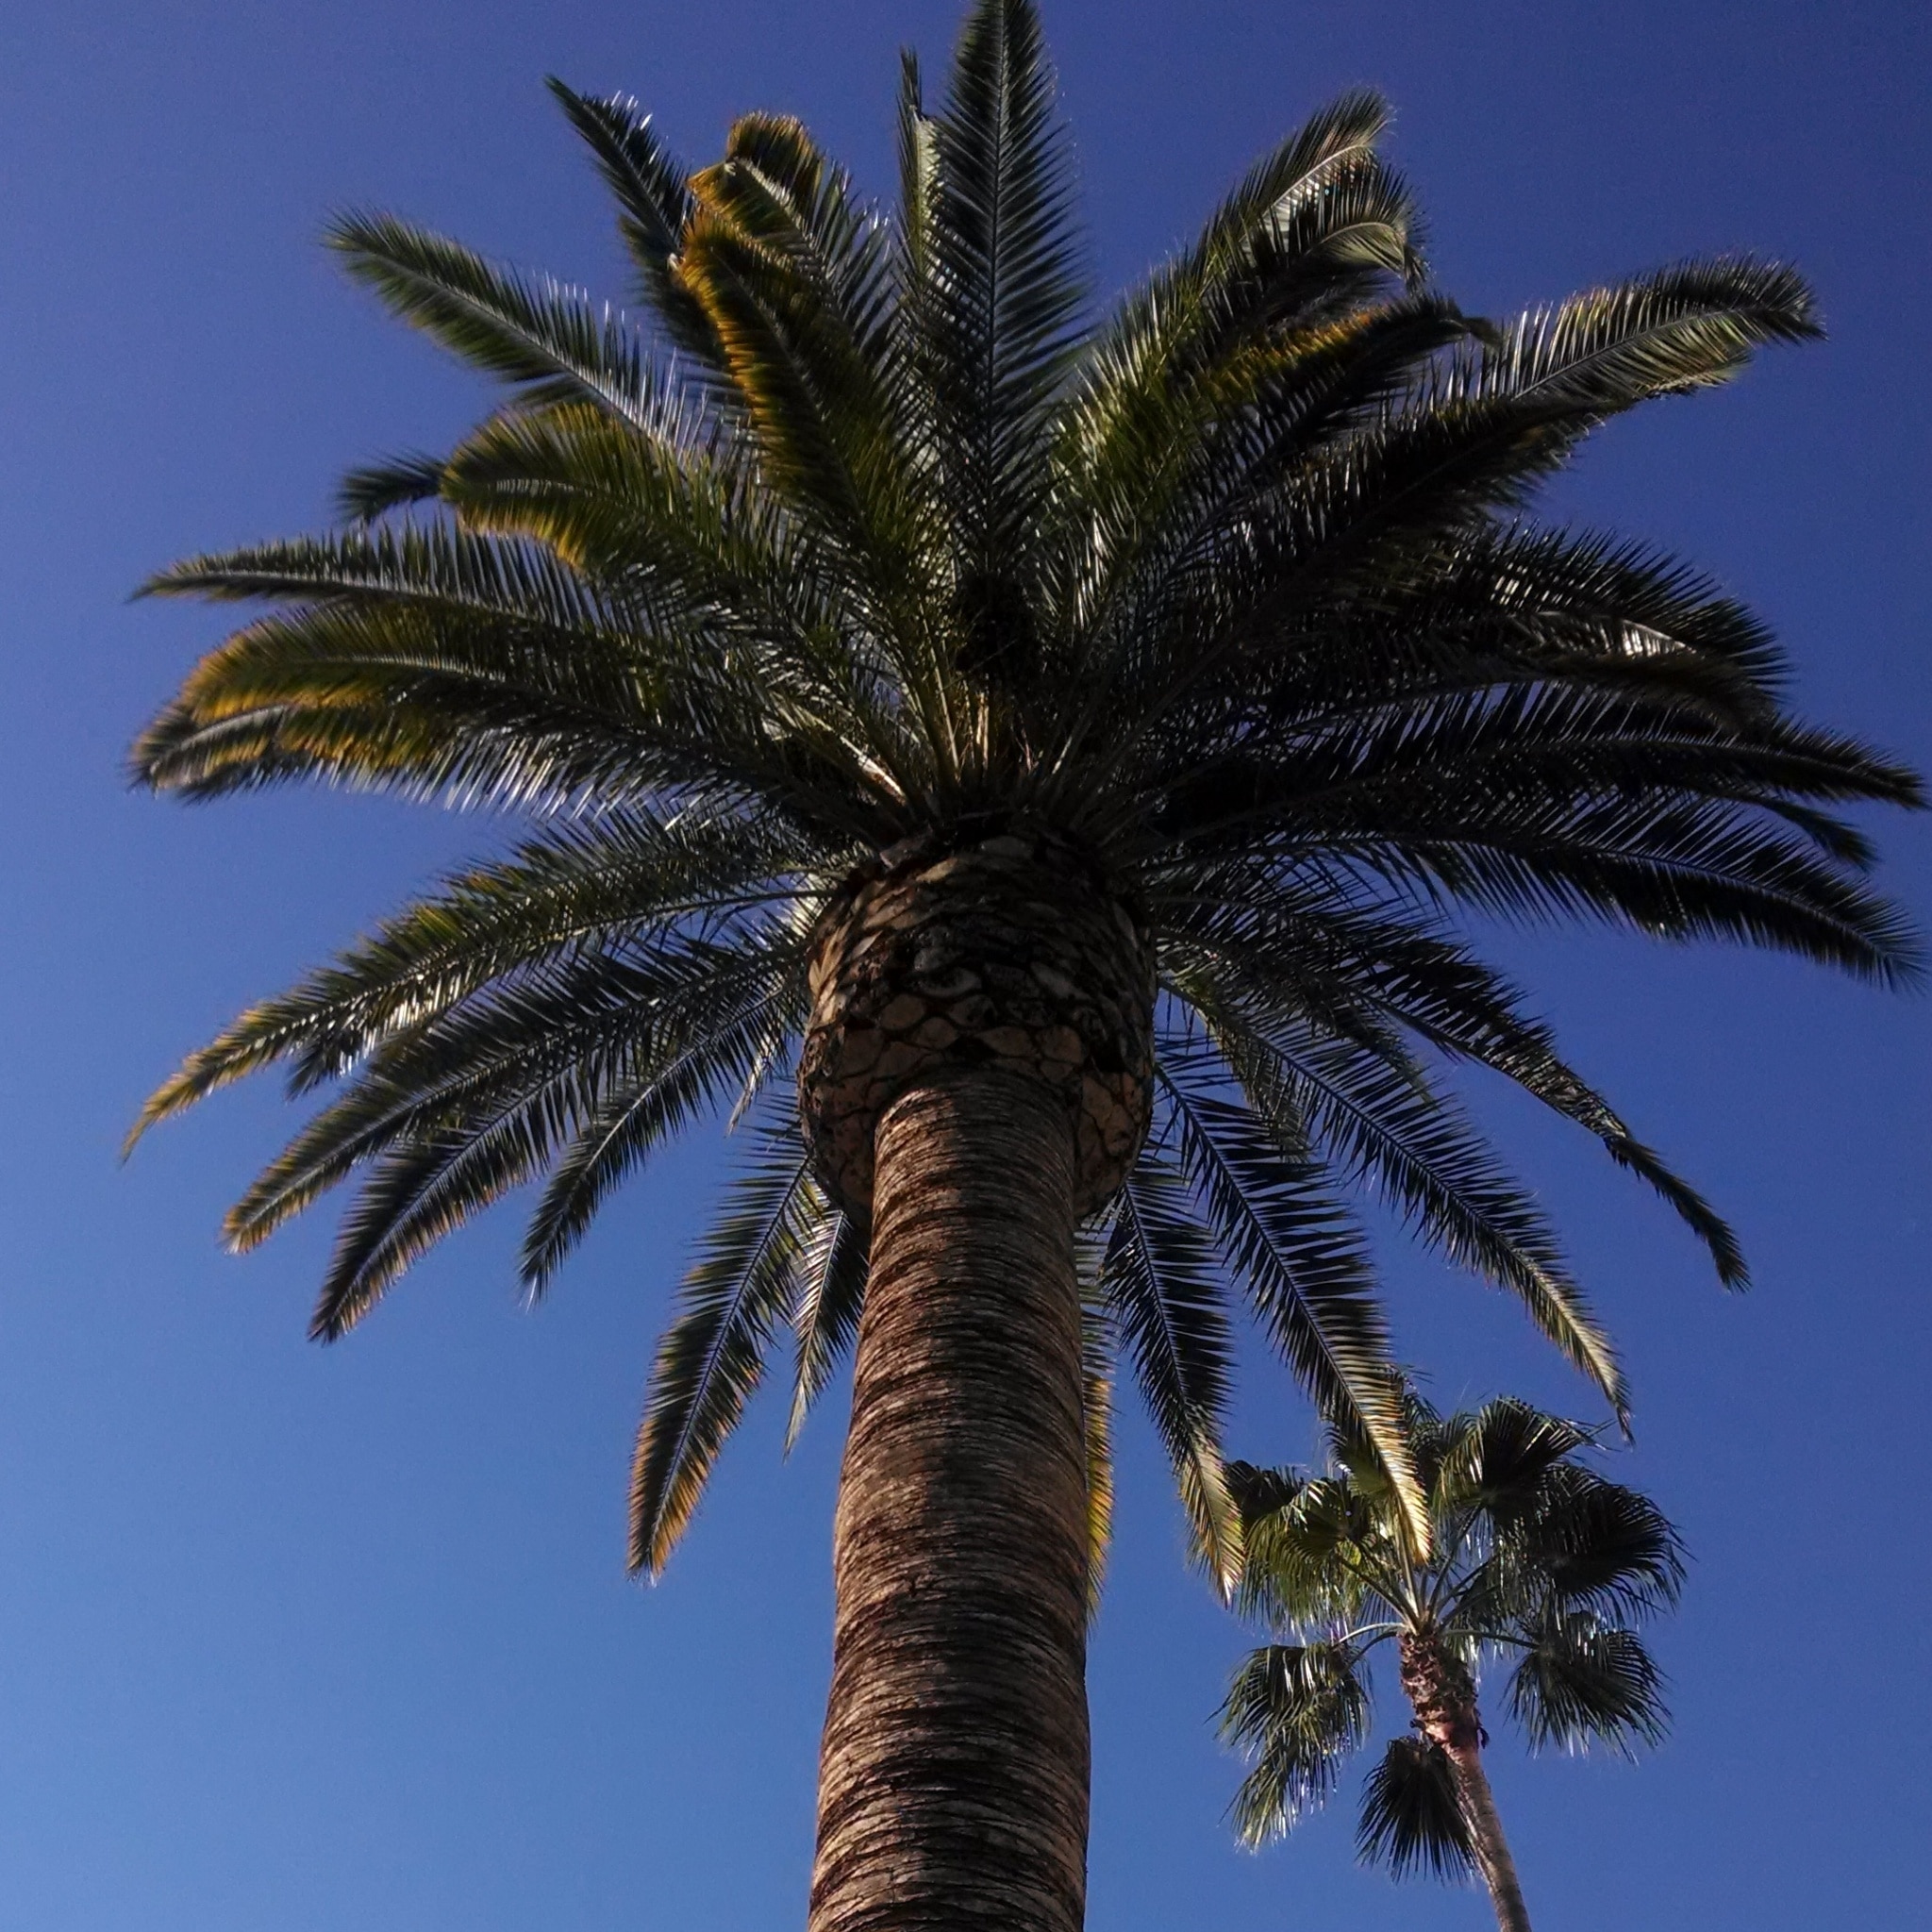 The palm trees in Southern California always seem picture perfect! 